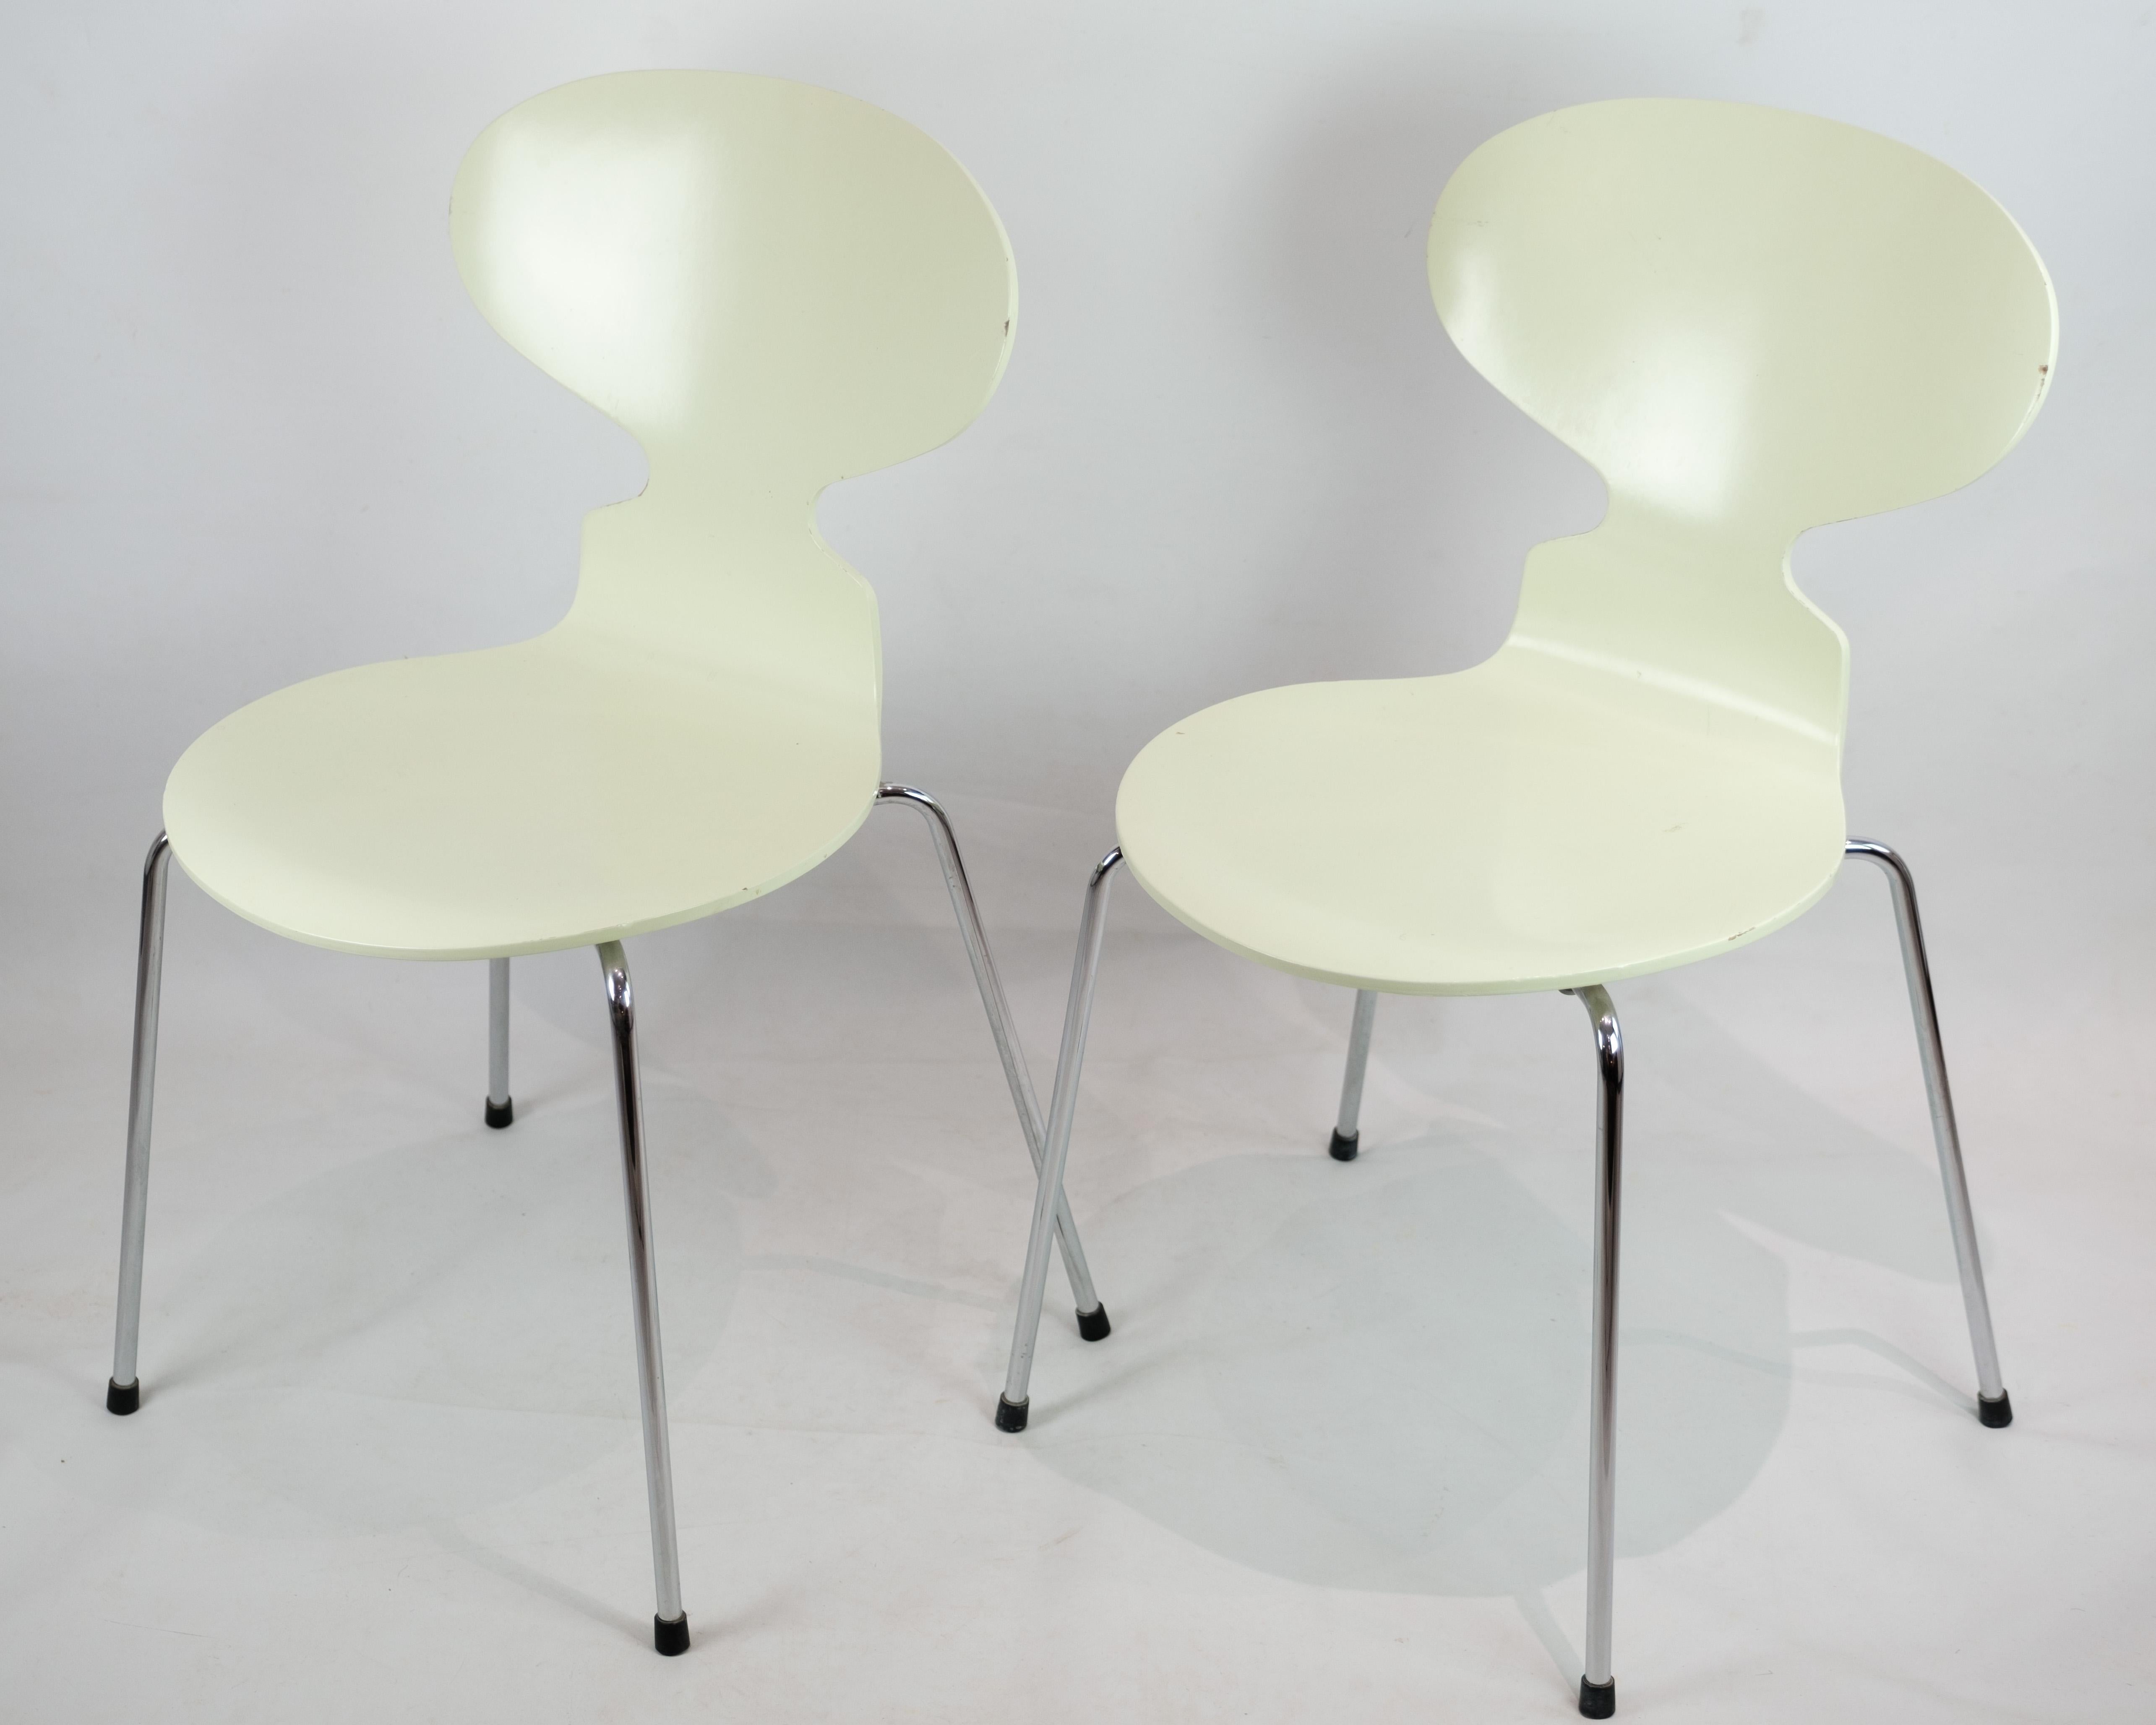 This original set of two Ant chairs, model 3101, brings a touch of vintage charm to any space with their pastel green colour. Designed by the renowned Arne Jacobsen and crafted by Fritz Hansen in the 1970s, these iconic chairs are both stylish and